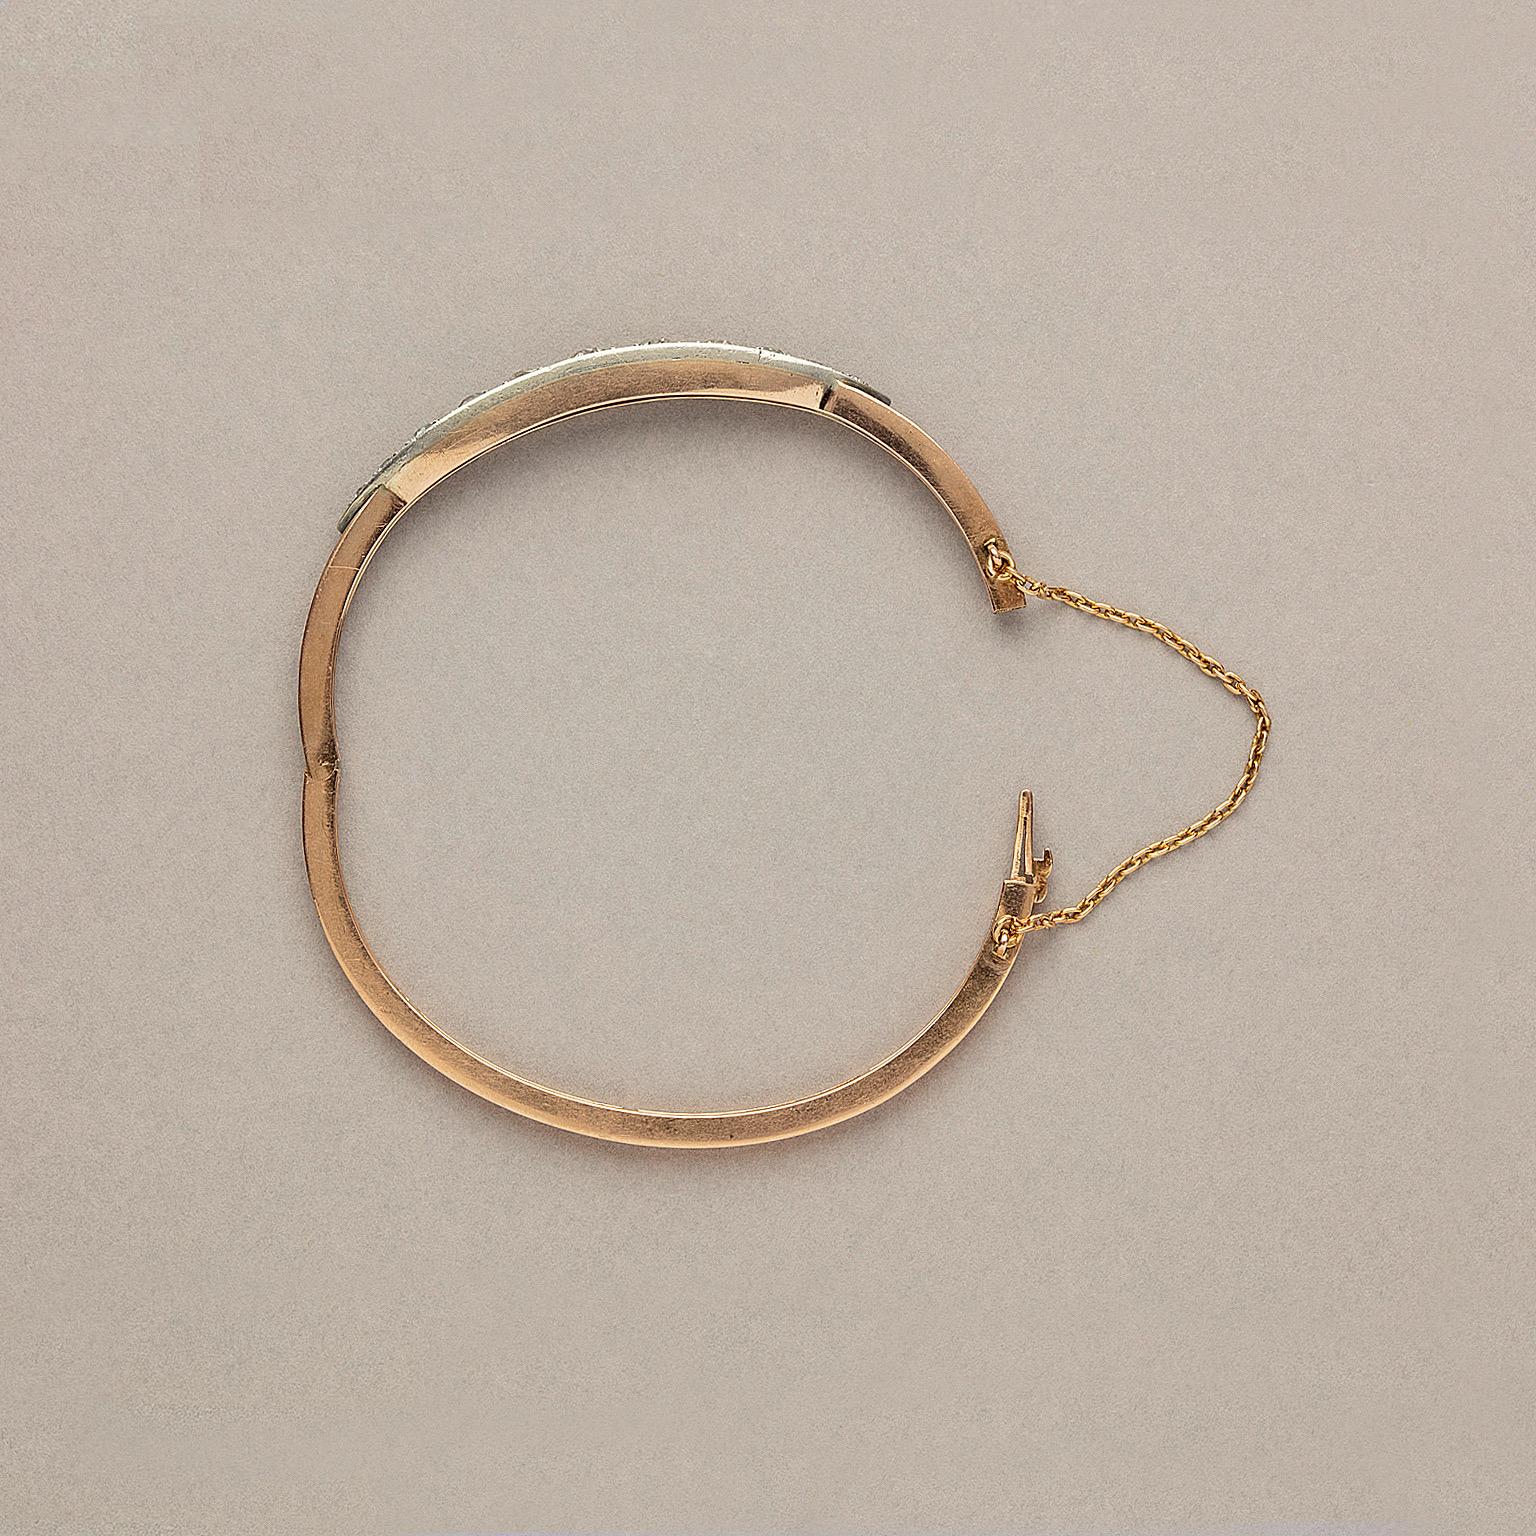 A 14 or 15 karat pink gold bangle with a double band with in between 11 old-cut diamonds (app. 3 carats H SI) graduating in size from the centre in a navette shaped silver mounting. Marked ET. Most likely English, circa 1890.
weight: 12.95